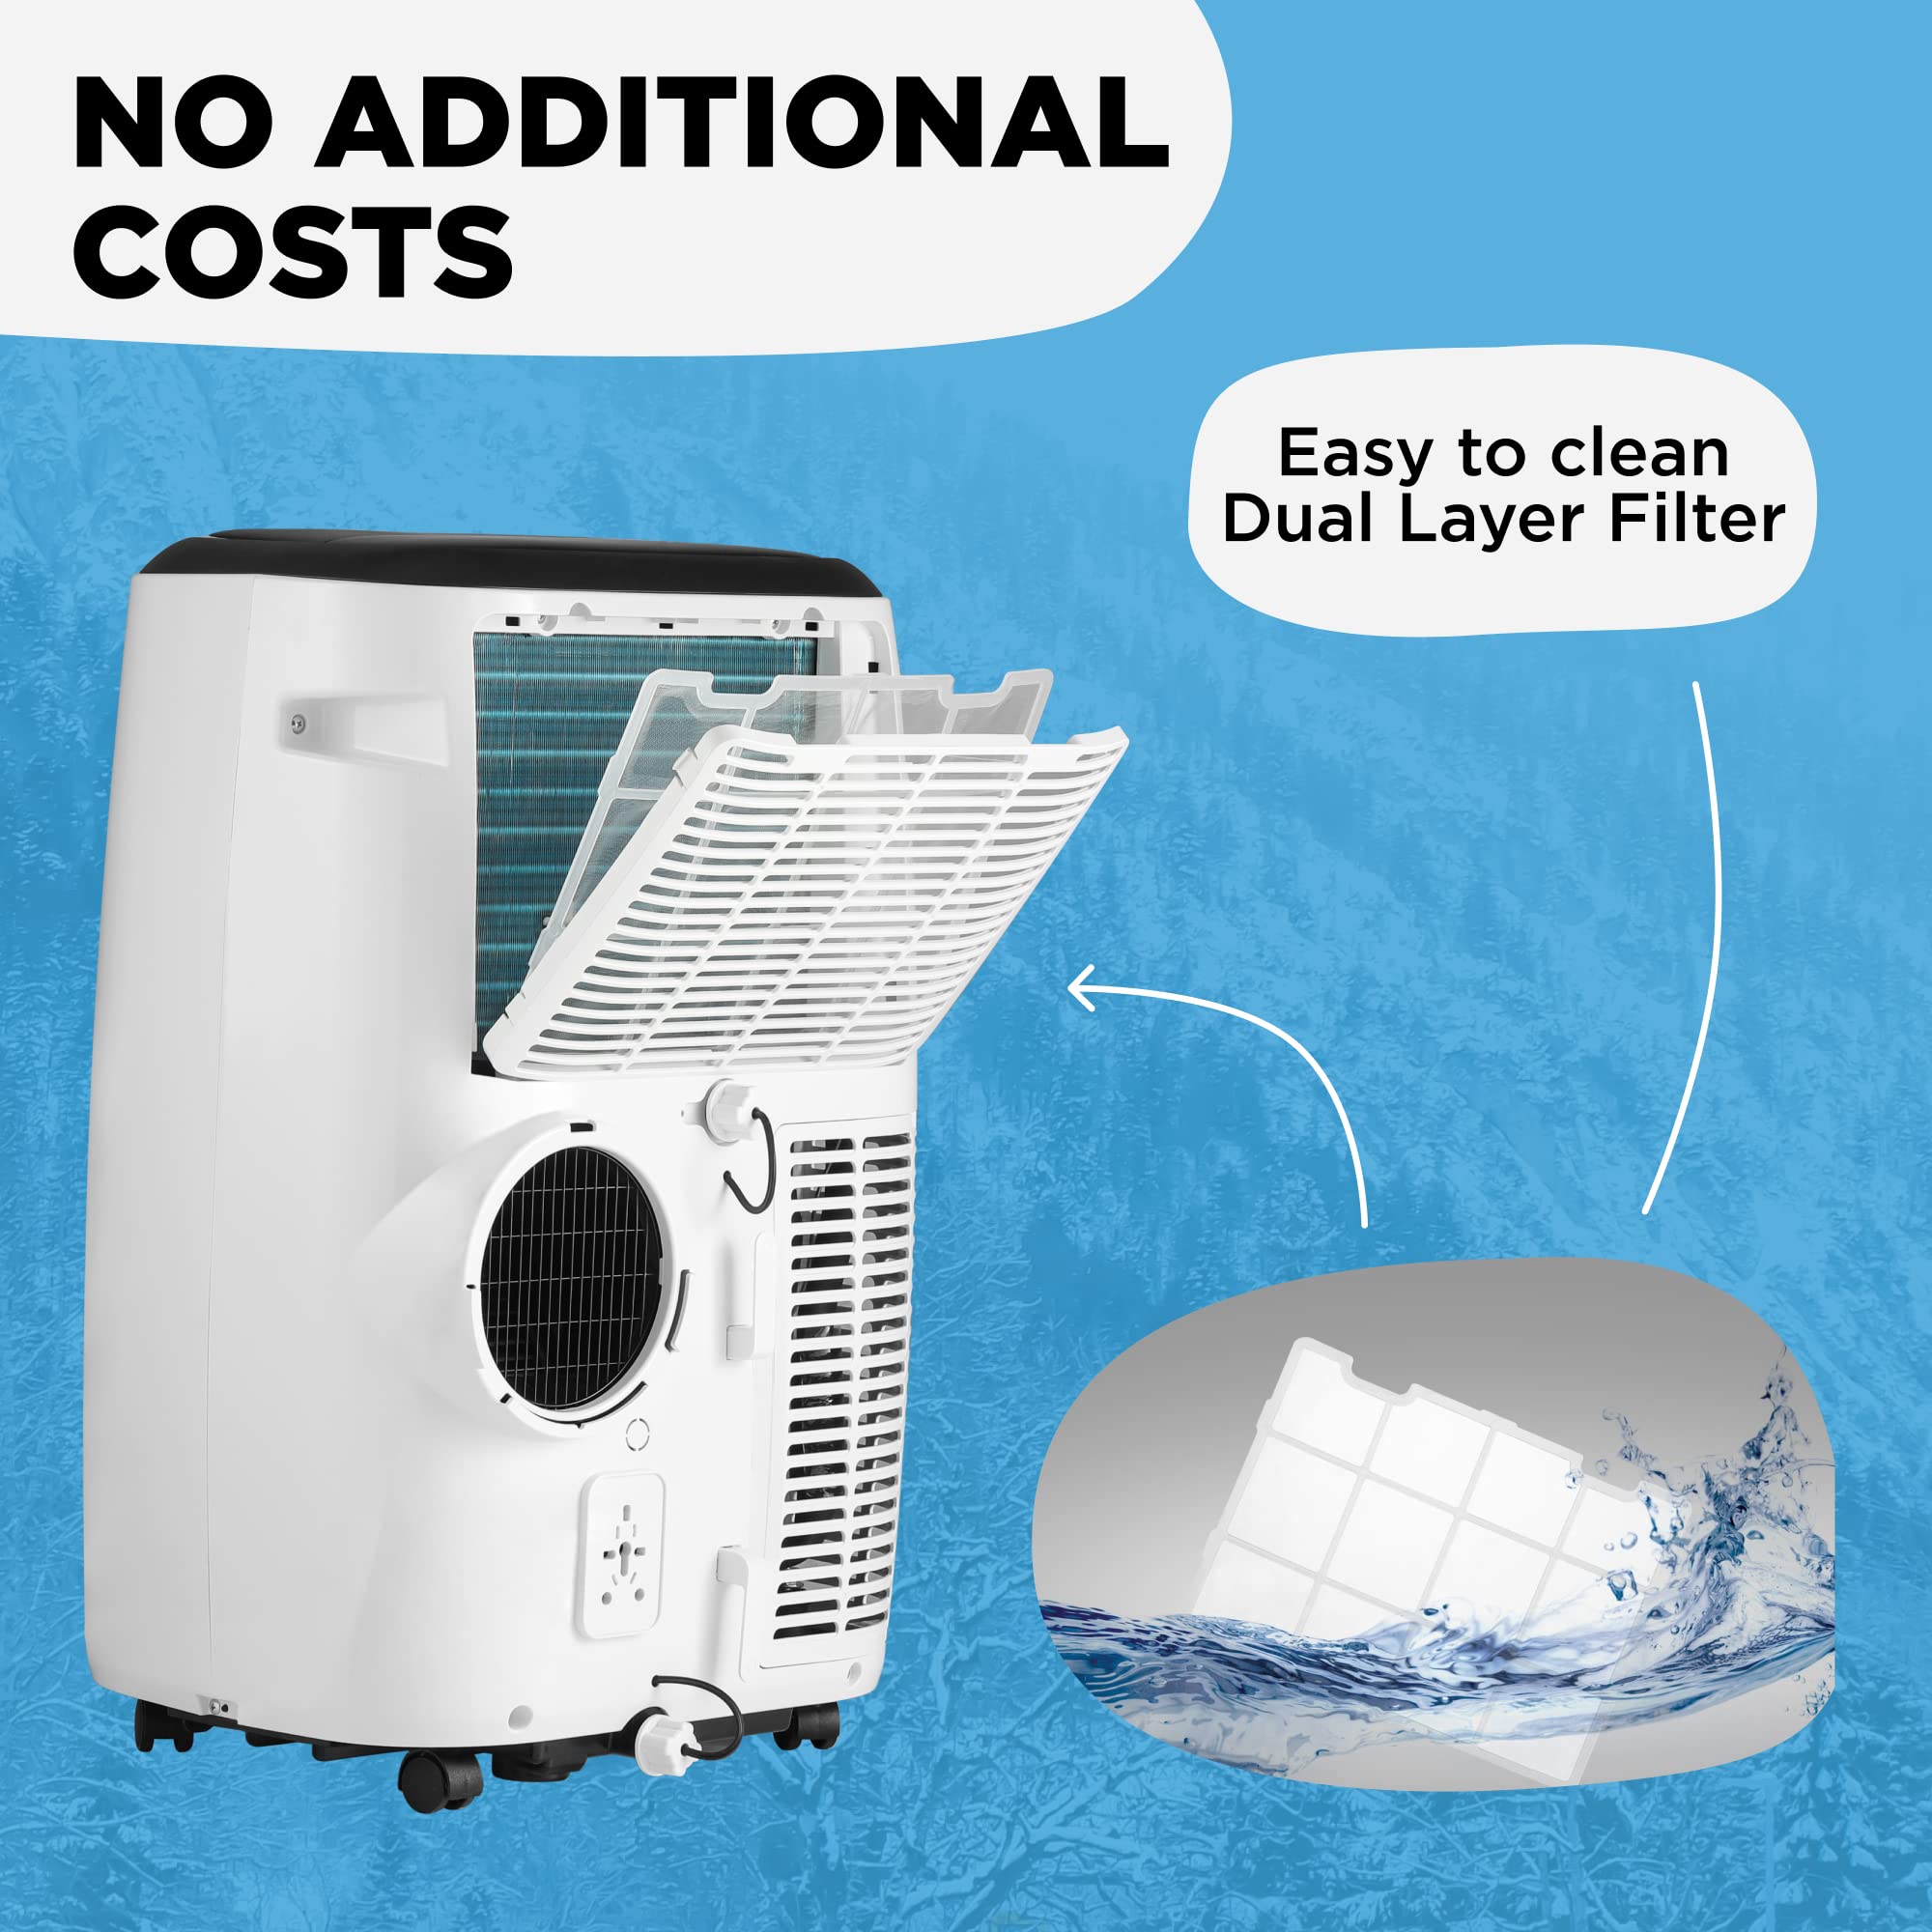 AIRO COMFORT Portable Air Conditioner 12000 BTU for Room 550 sq. ft, Floor Standing AC Unit with Remote Control & DYI Installation Kit